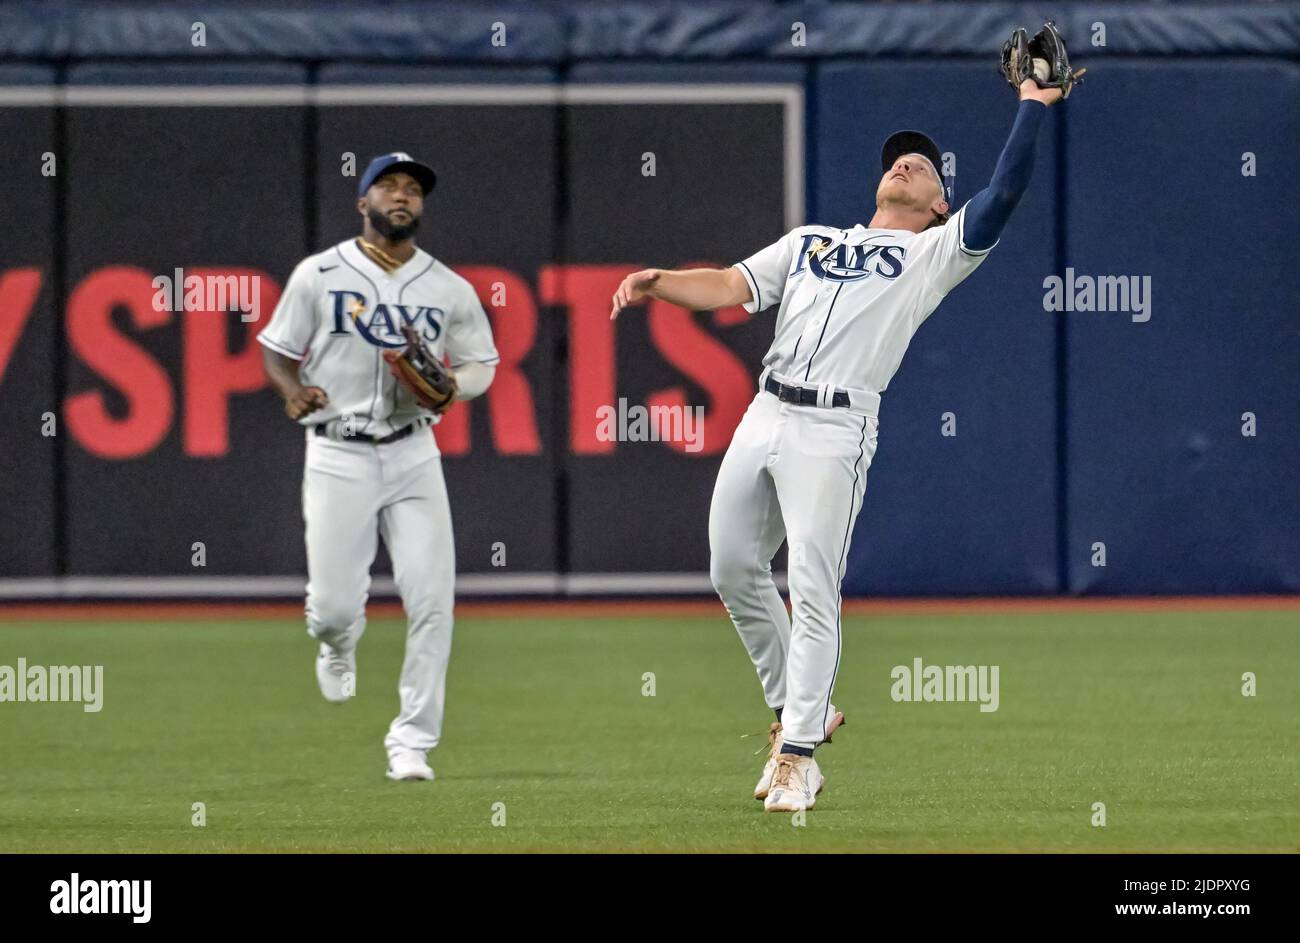 St Petersburg, United States. 22nd June, 2022. Tampa Bay Rays' Randy Arozarena (L) looks on as Taylor Walls grabs a fly ball hit by New York Yankees' Matt Carpenter during the fourth inning at Tropicana Field in St. Petersburg, Florida on Wednesday, June 22, 2022. Photo by Steve Nesius/UPI Credit: UPI/Alamy Live News Stock Photo